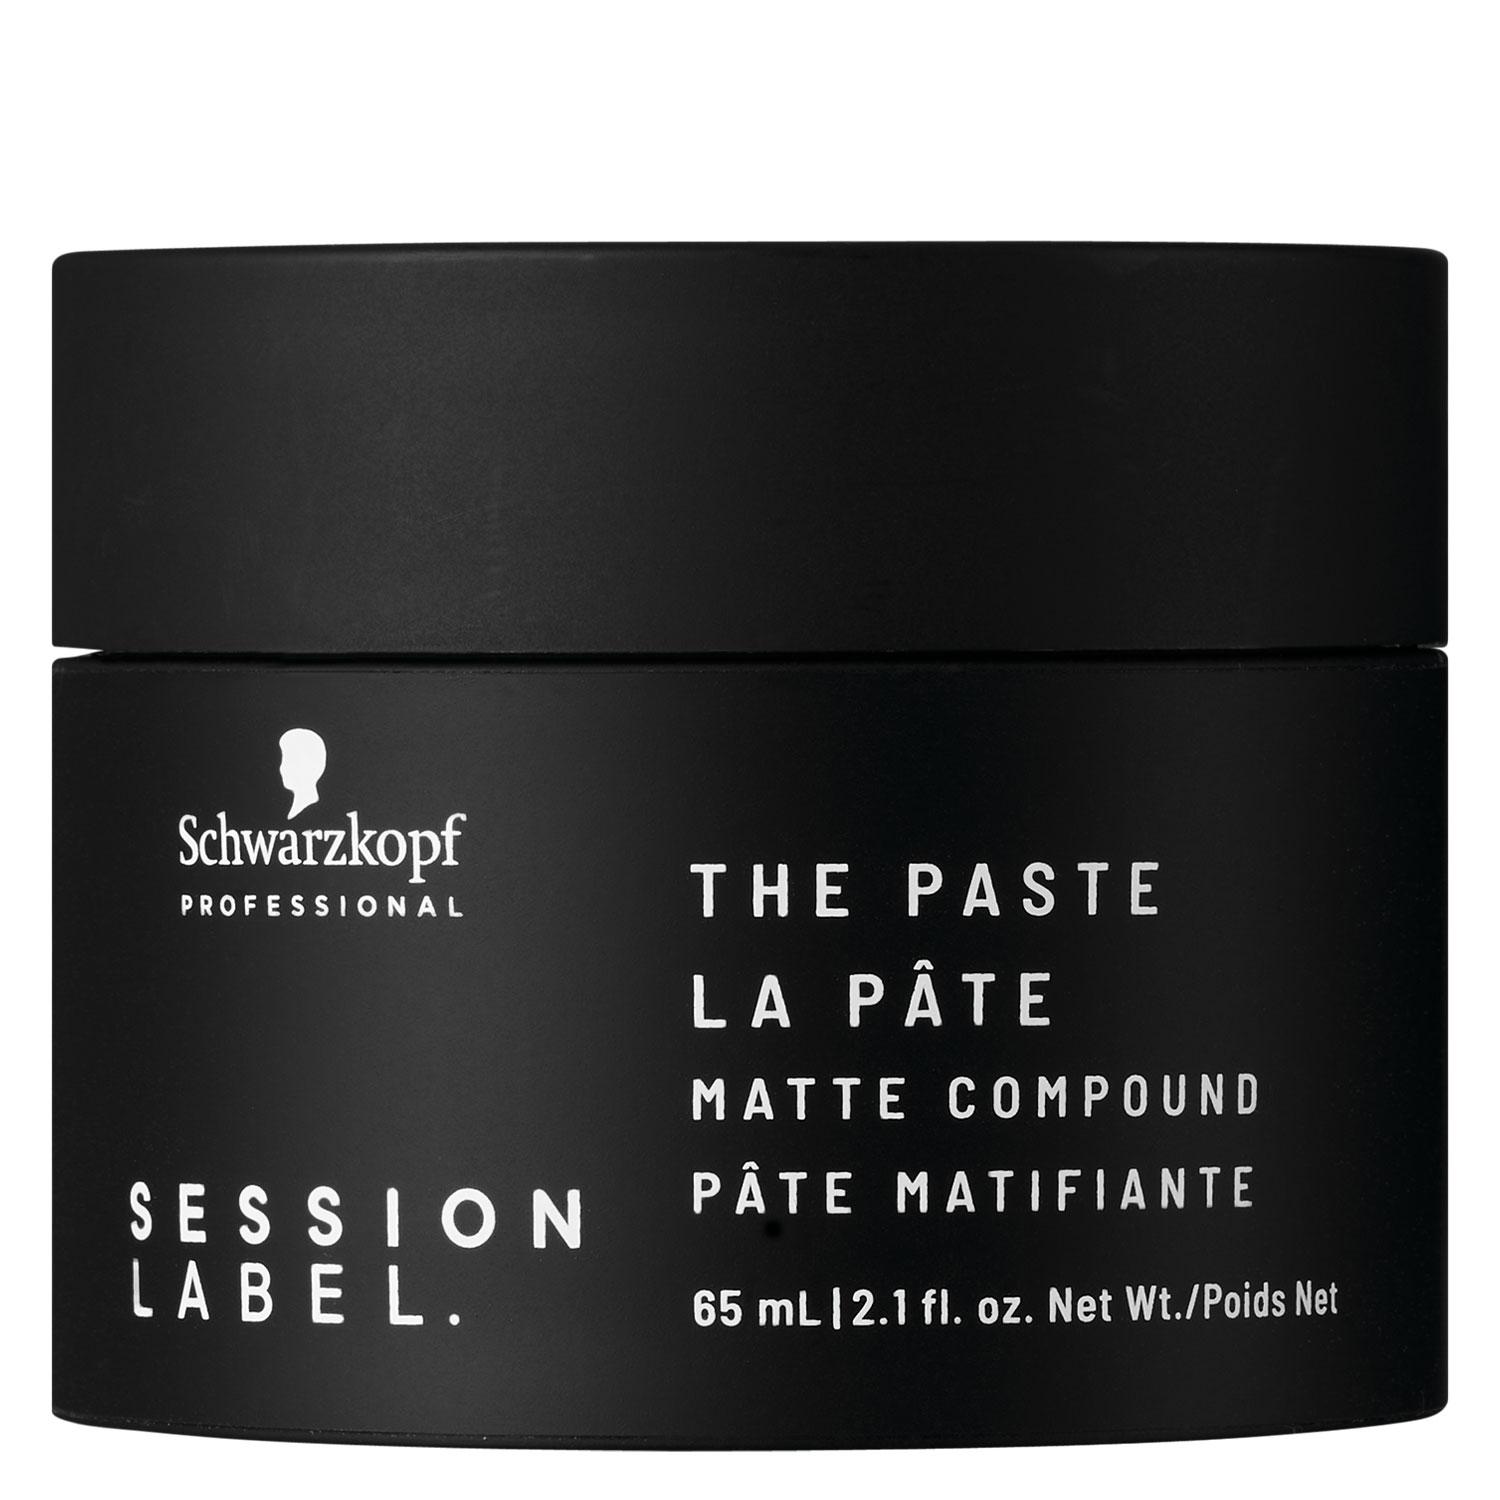 Session Label - The Paste